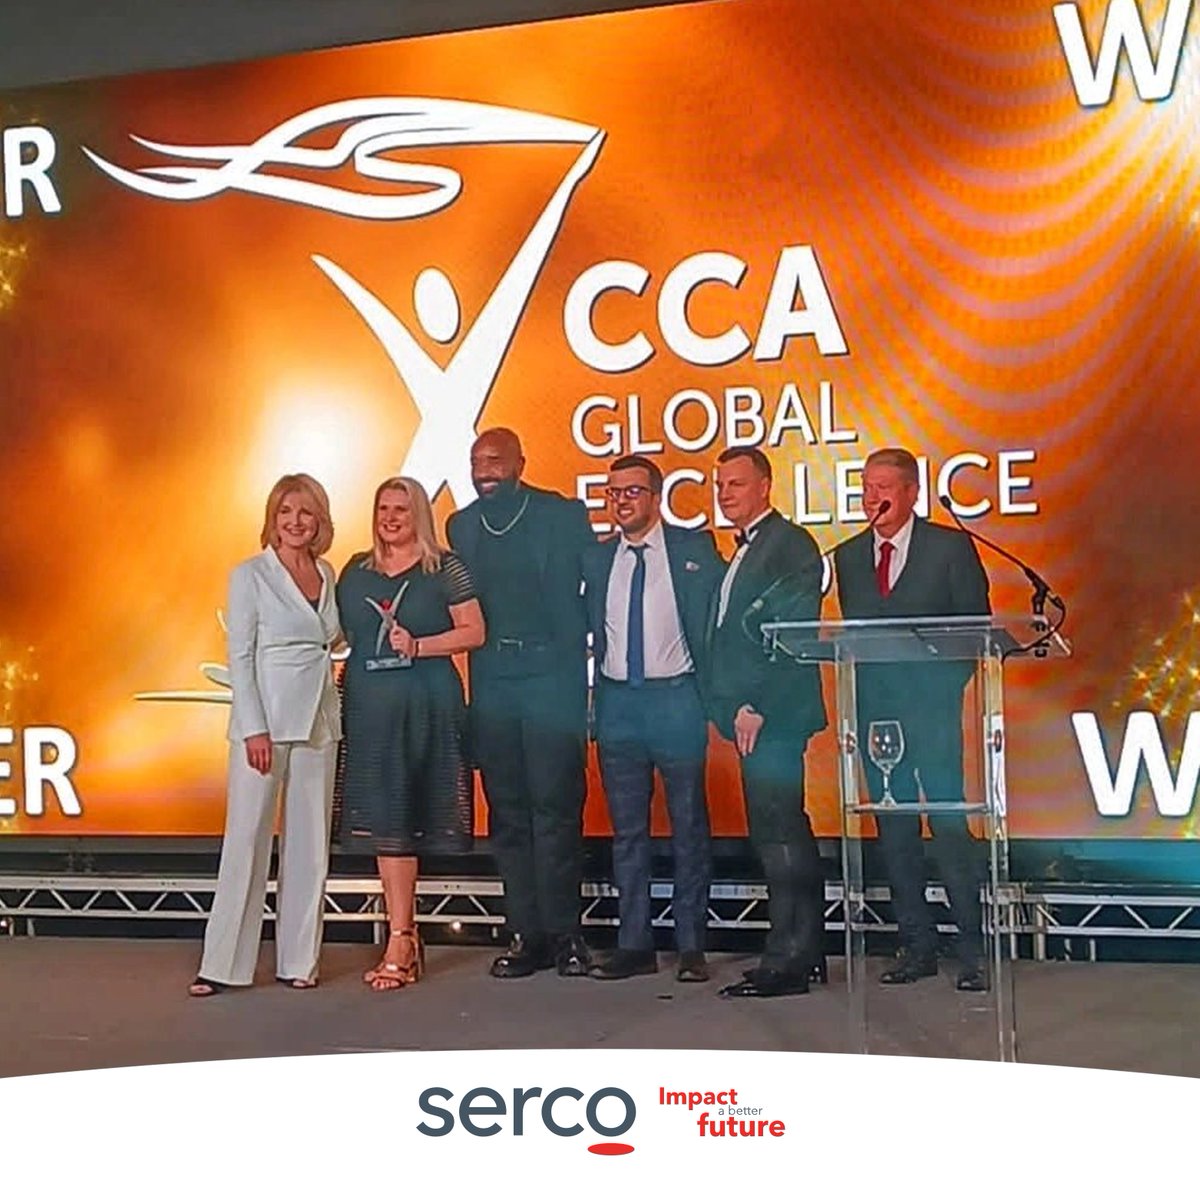 We are delighted to announce that our Serco Wellbeing and Culture team has won the prestigious @CCA_Global 2024 Excellence Awards. A huge well done to the team! #ImpactABetterFuture